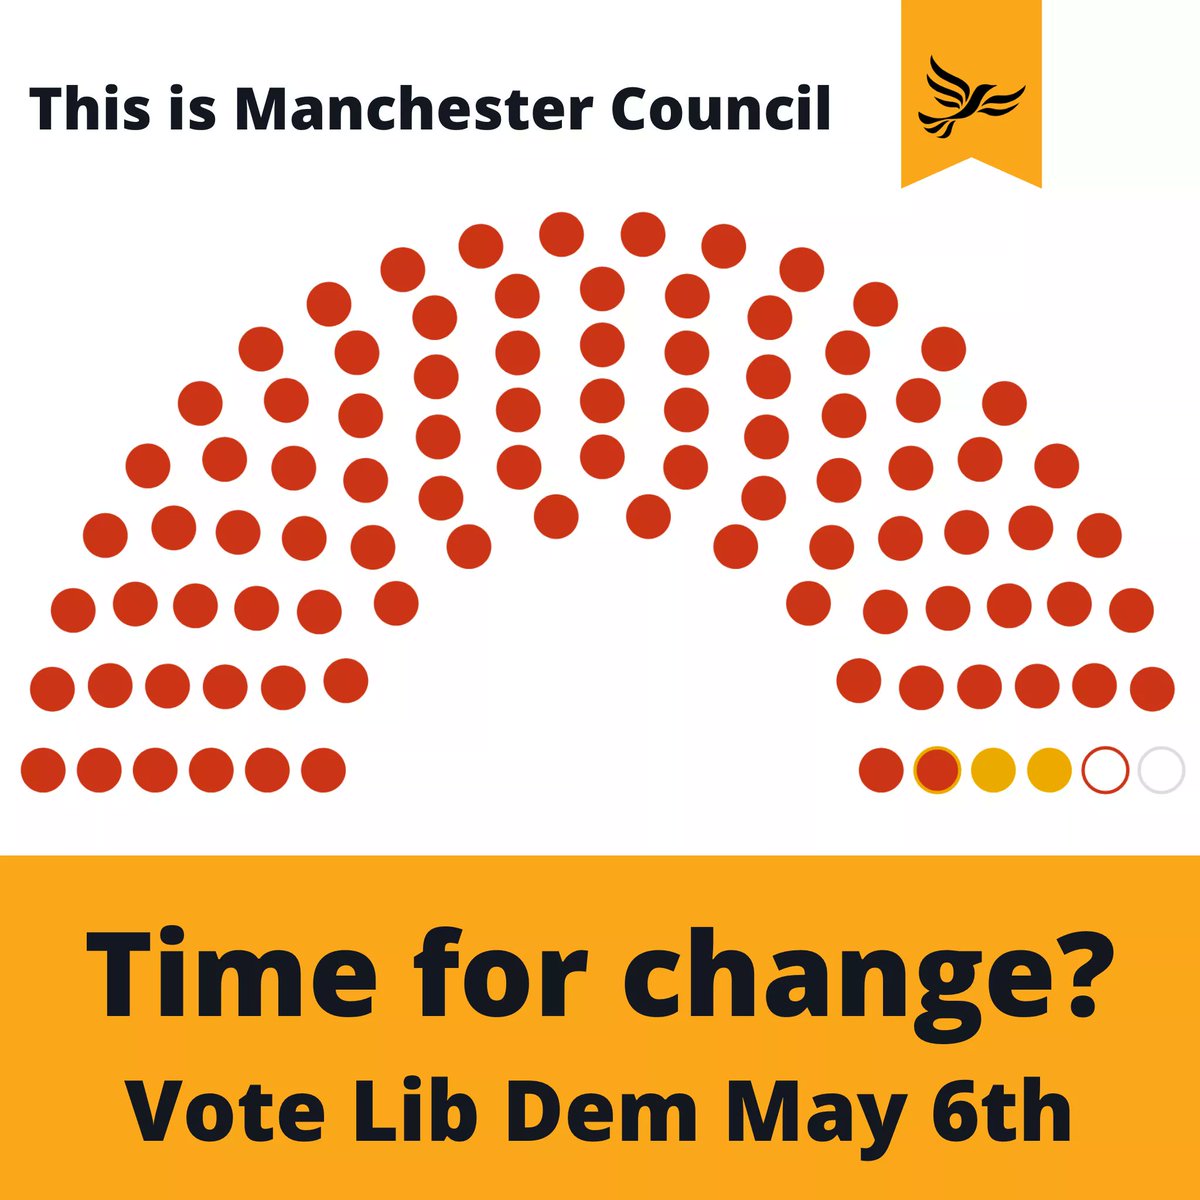 It couldn't be closer here in #Deansgate, one of only a handful of marginal wards. In the city centre, every vote counts. Time to Change this city